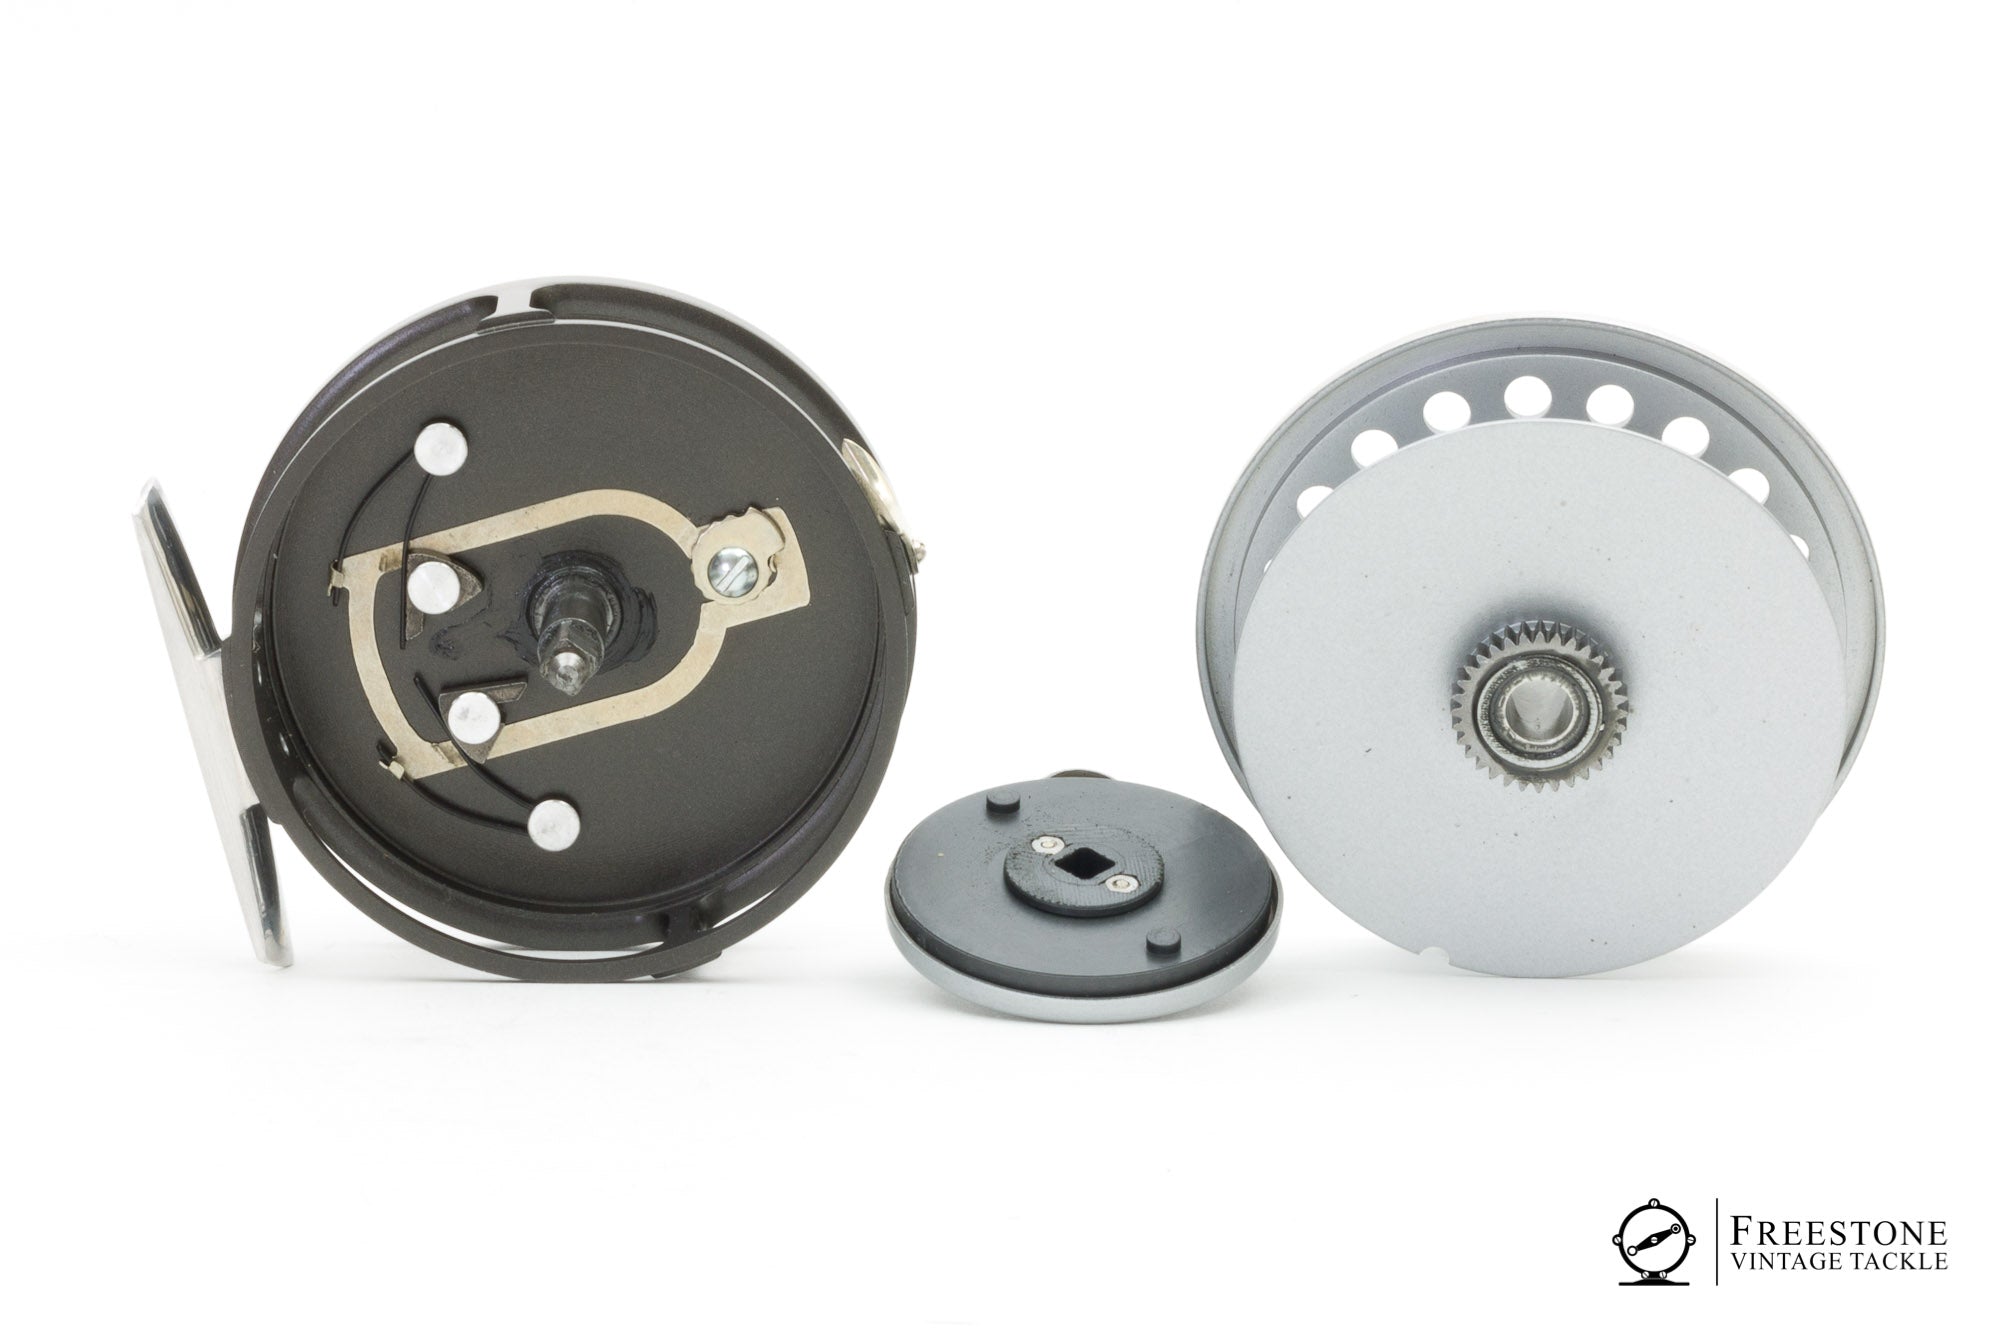 SYSTEM 6 FLY Reel, Hardy Marquis $119.00 - PicClick